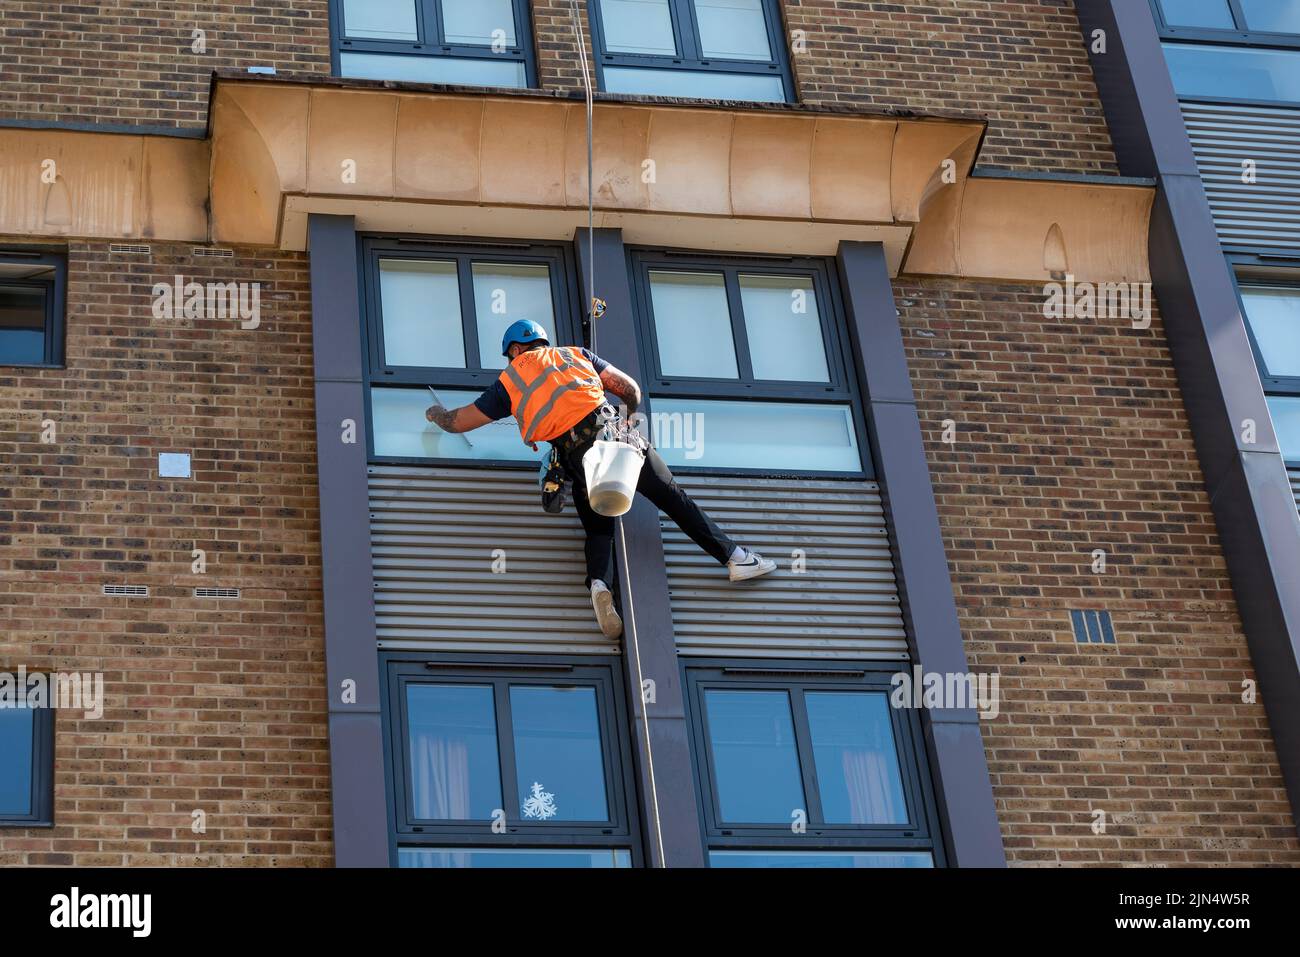 A rope access window cleaner using high rope to clean the windows of a high building in Shad Thames, London, UK Stock Photo